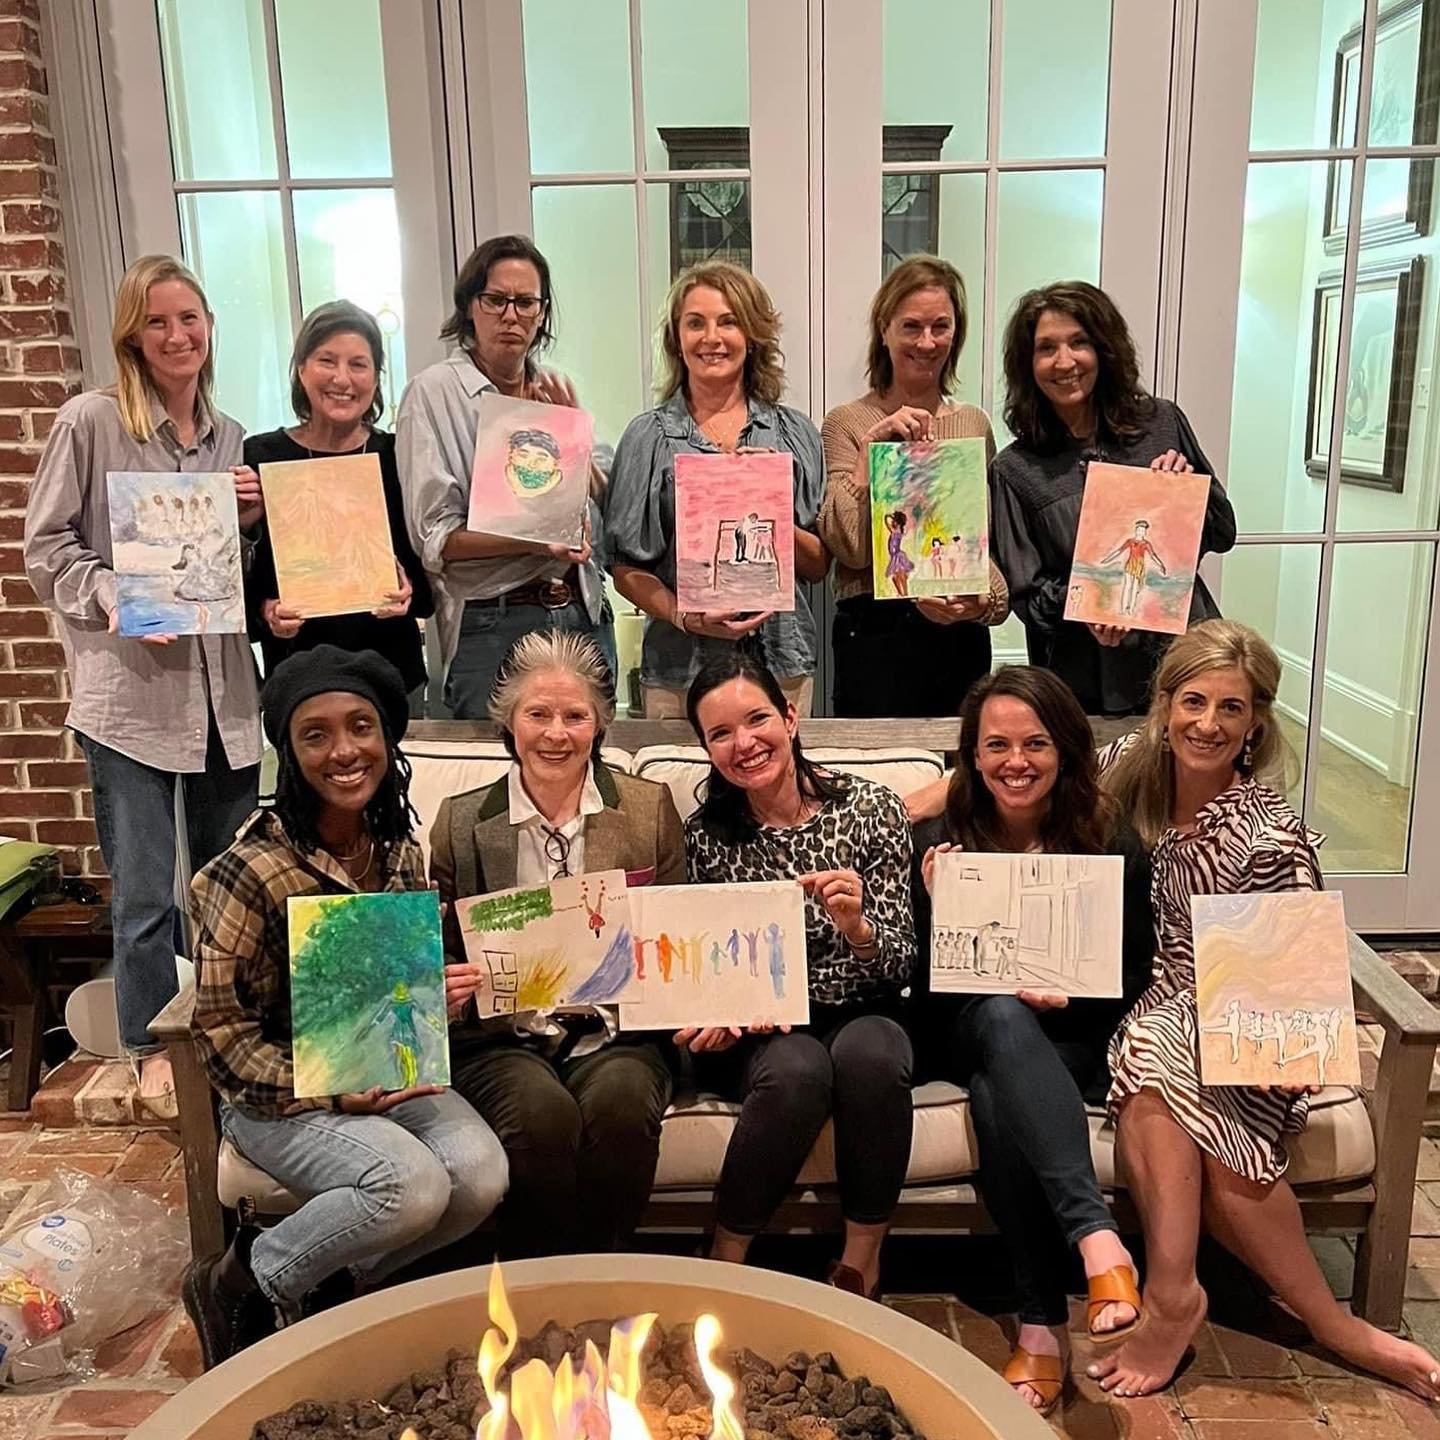 🎨✨ What an incredible night at our Paint with Joey Young event! We are thrilled to announce that we raised $500, all thanks to your support and generosity. A huge thank you to Jack and Mary Martha Bobo for hosting this amazing paint and sip event, a